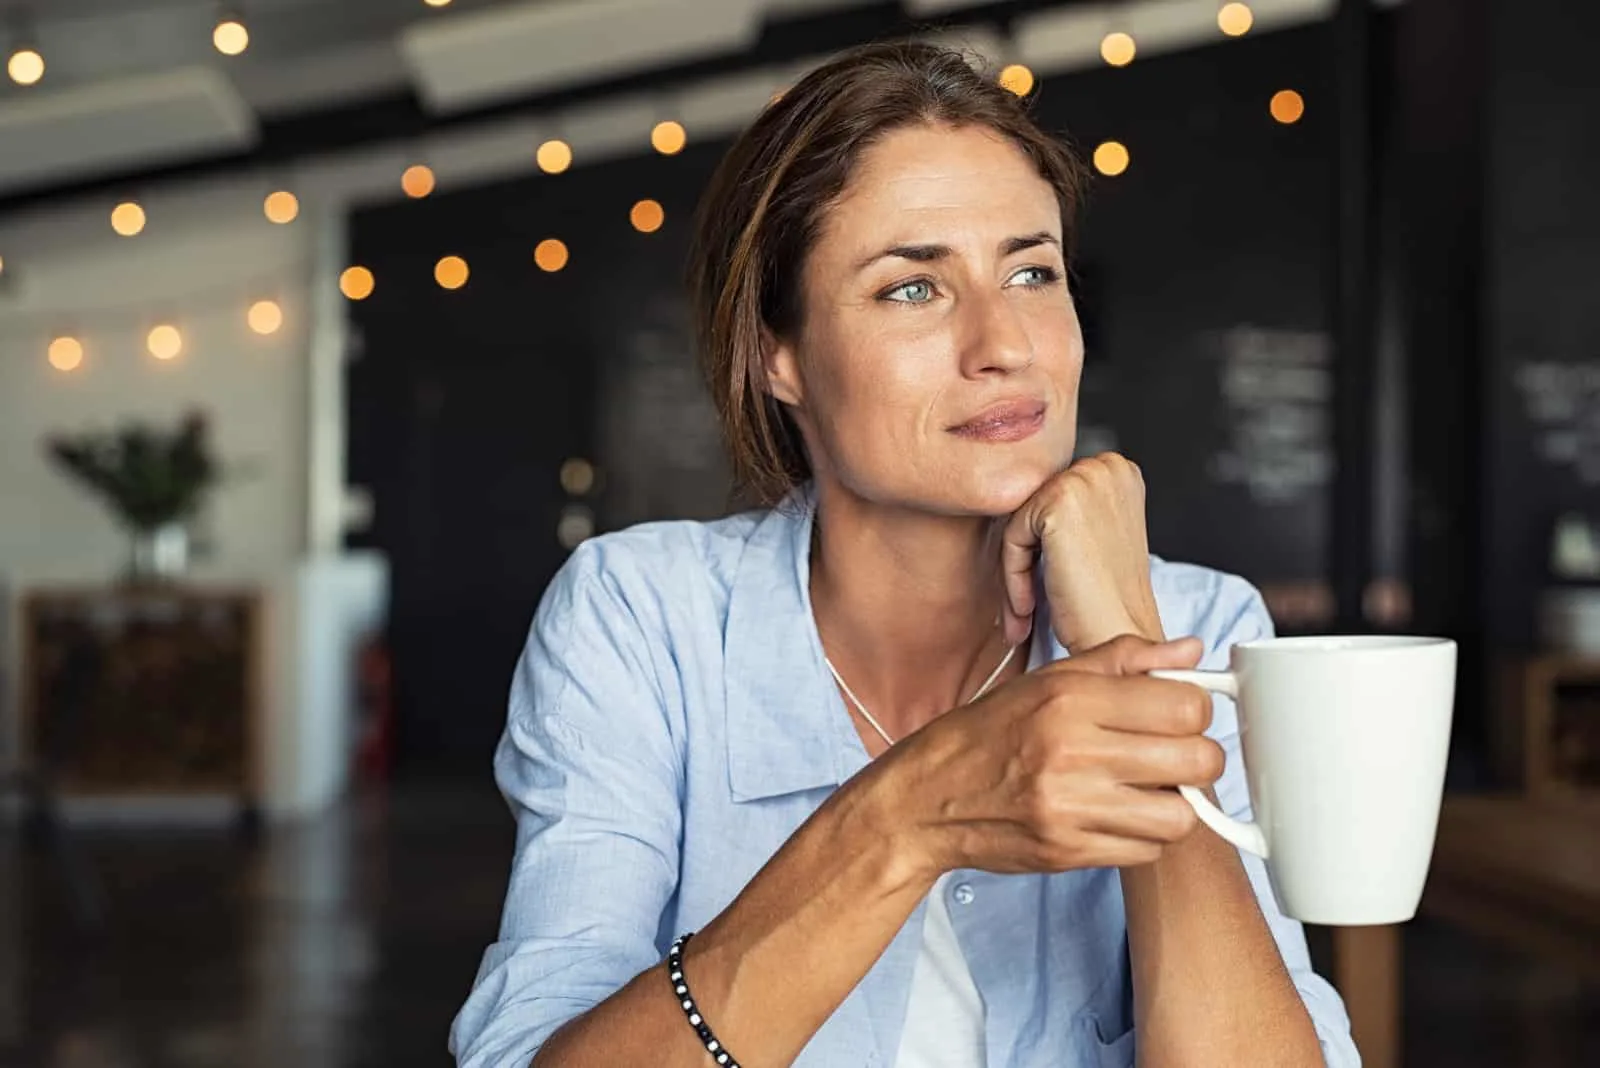 mature woman sitting in cafeteria holding coffee mug